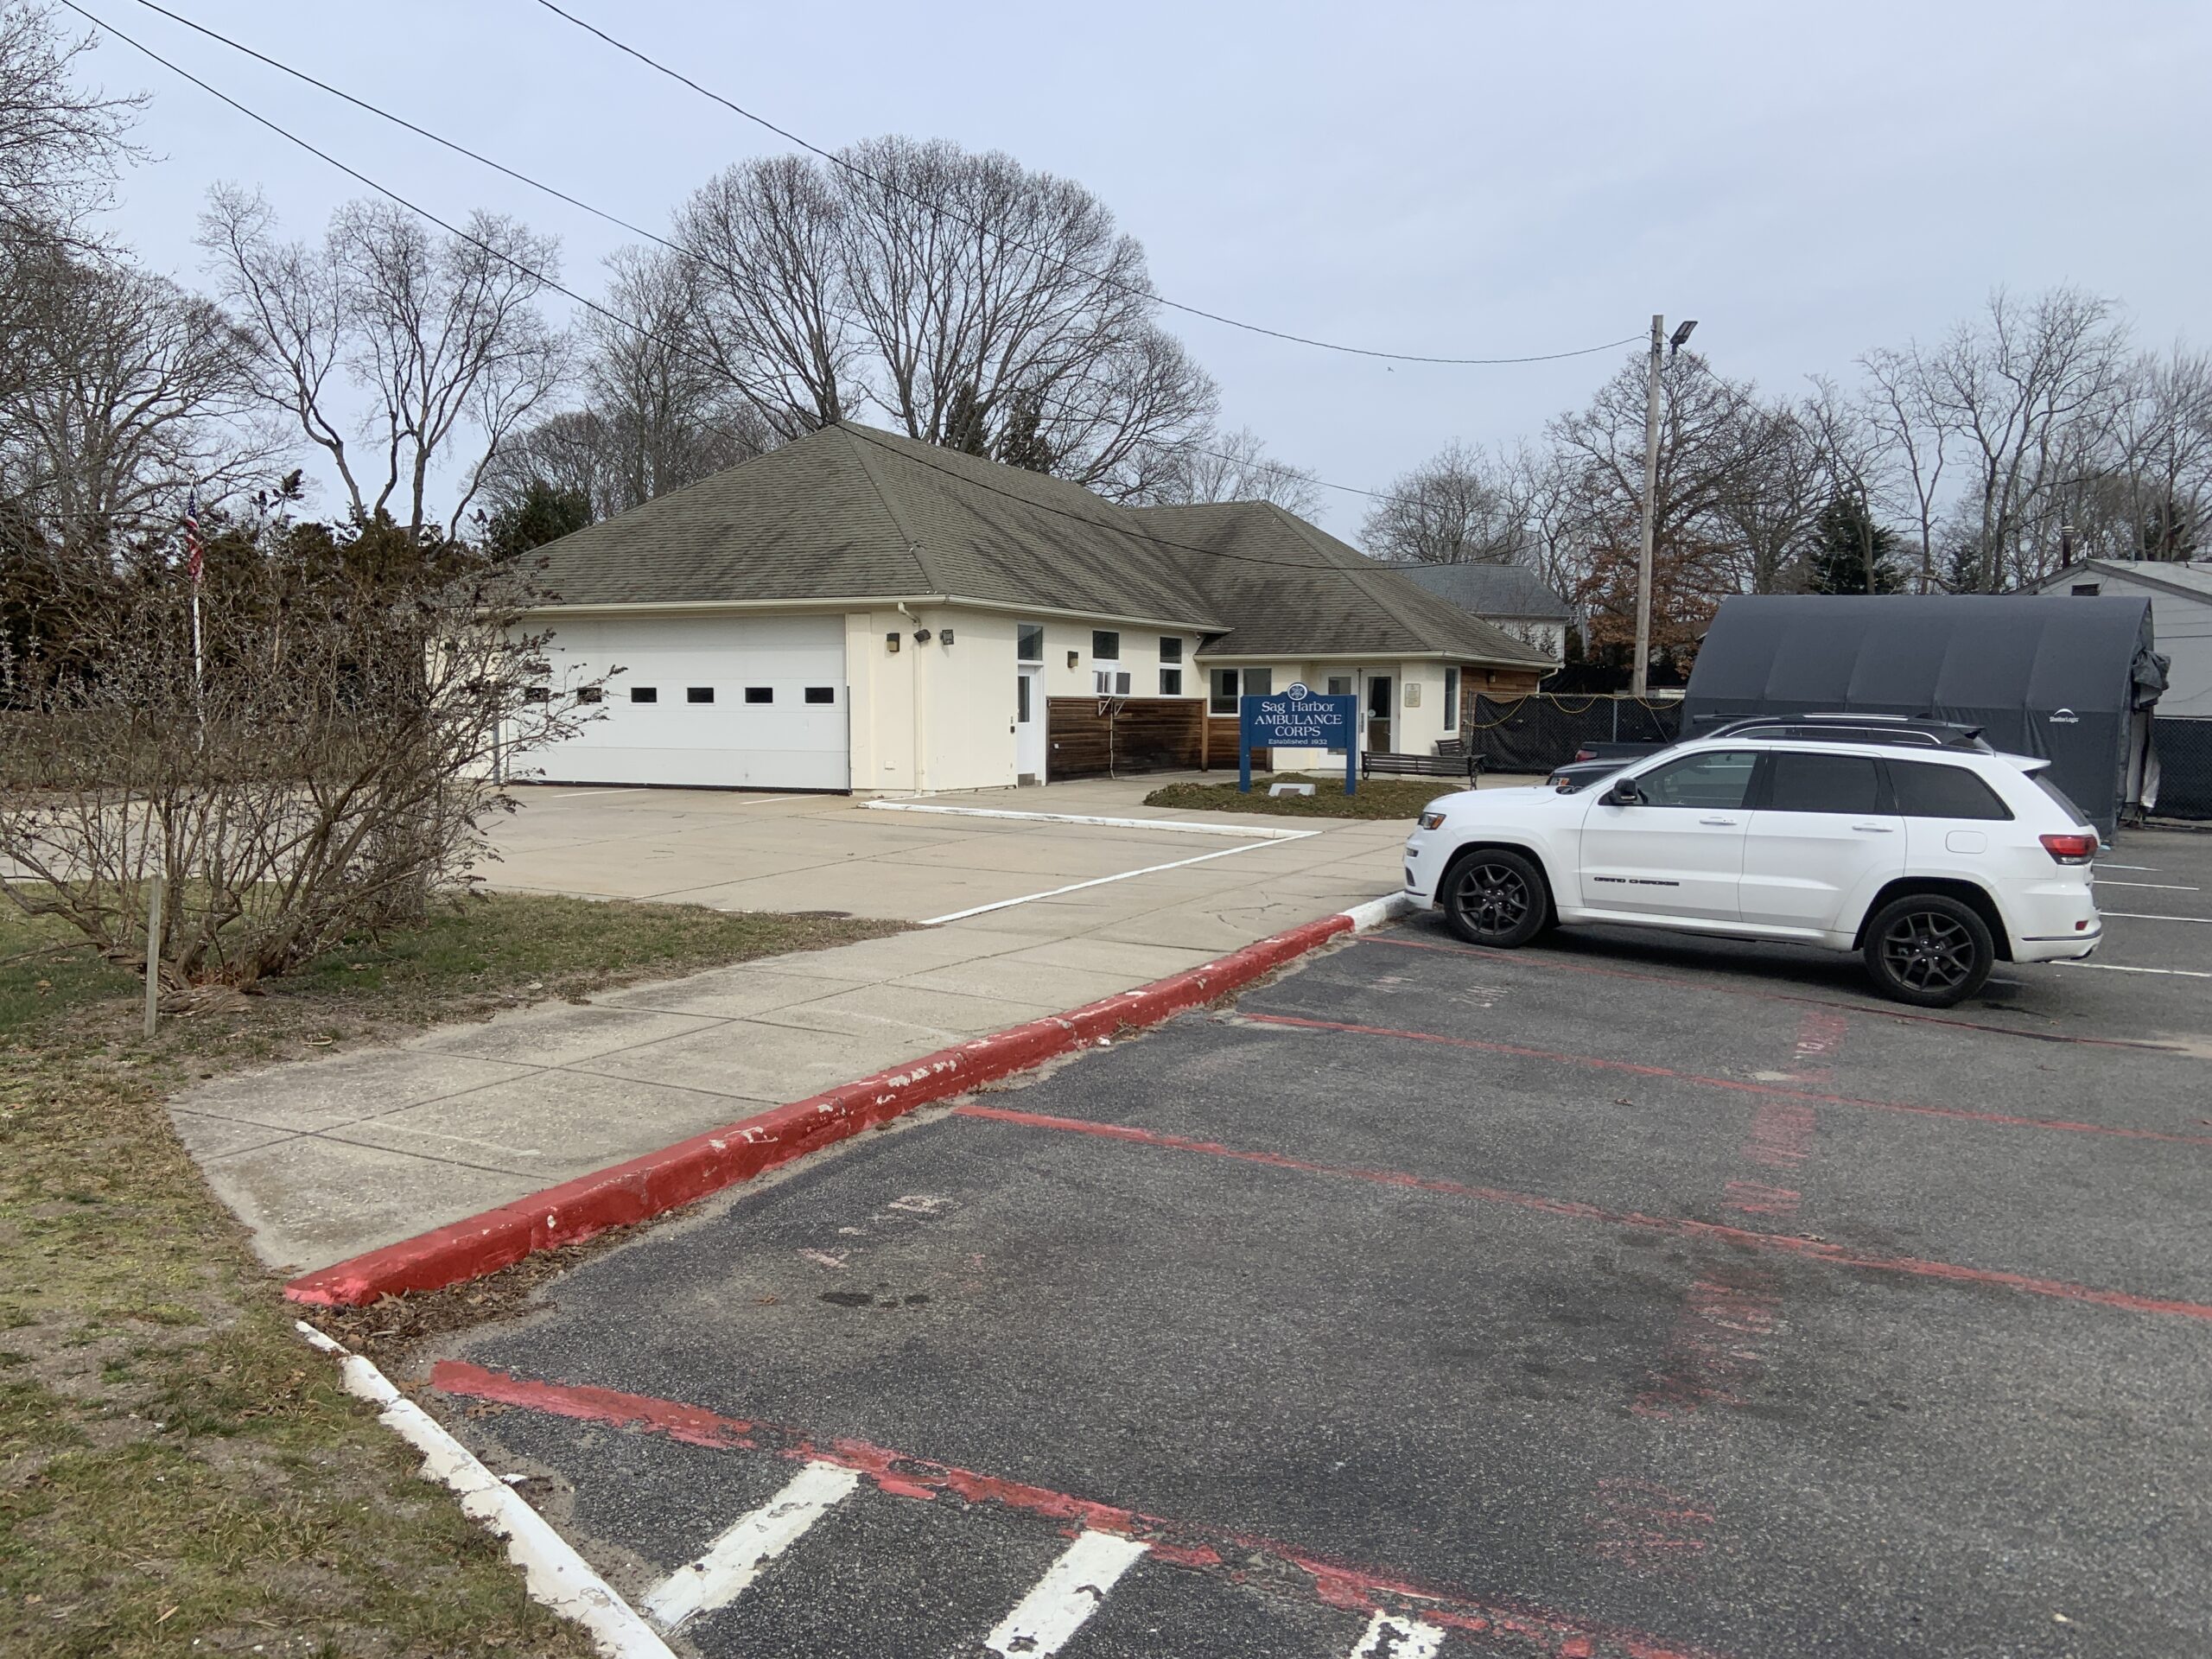 The Sag Harbor Ambulance Corps headquarters could be razed and replaced with affordable housing if a proposal offered by Trustee Tom Gardella proves feasible. STEPHEN J. KOTZ